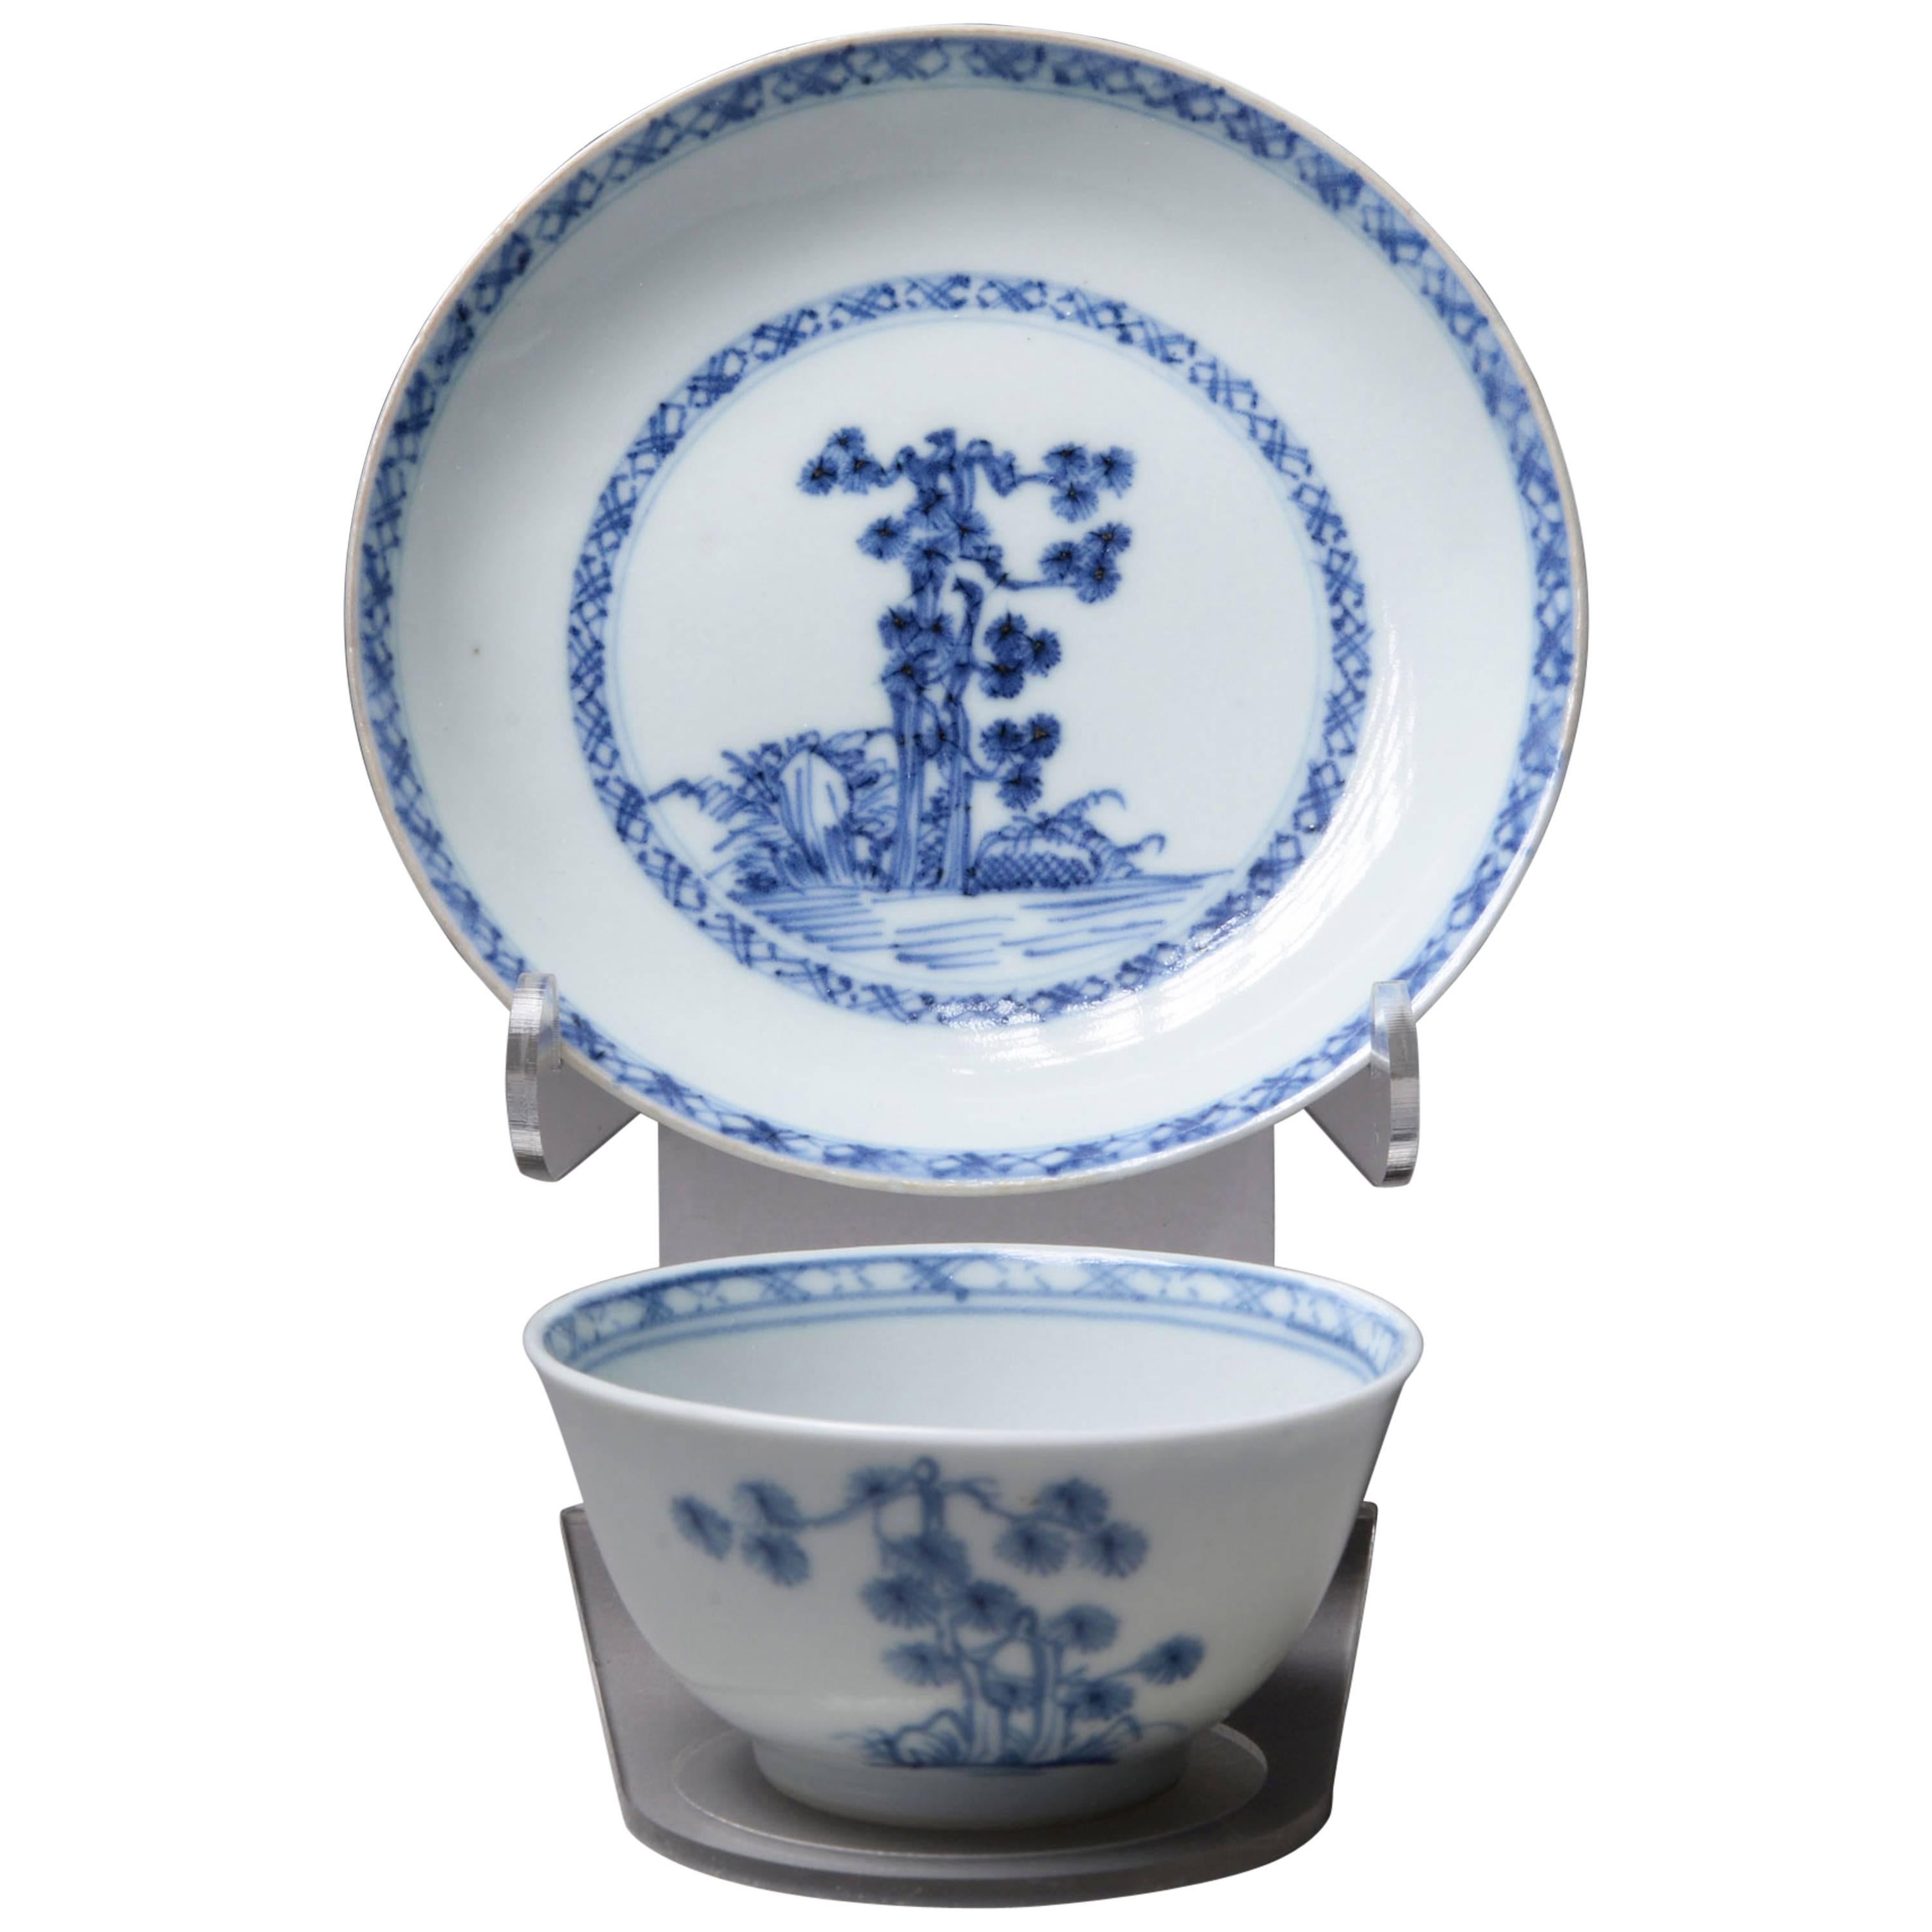 Shipwreck Salvaged Porcelain Tea Set from the Nanking Cargo 